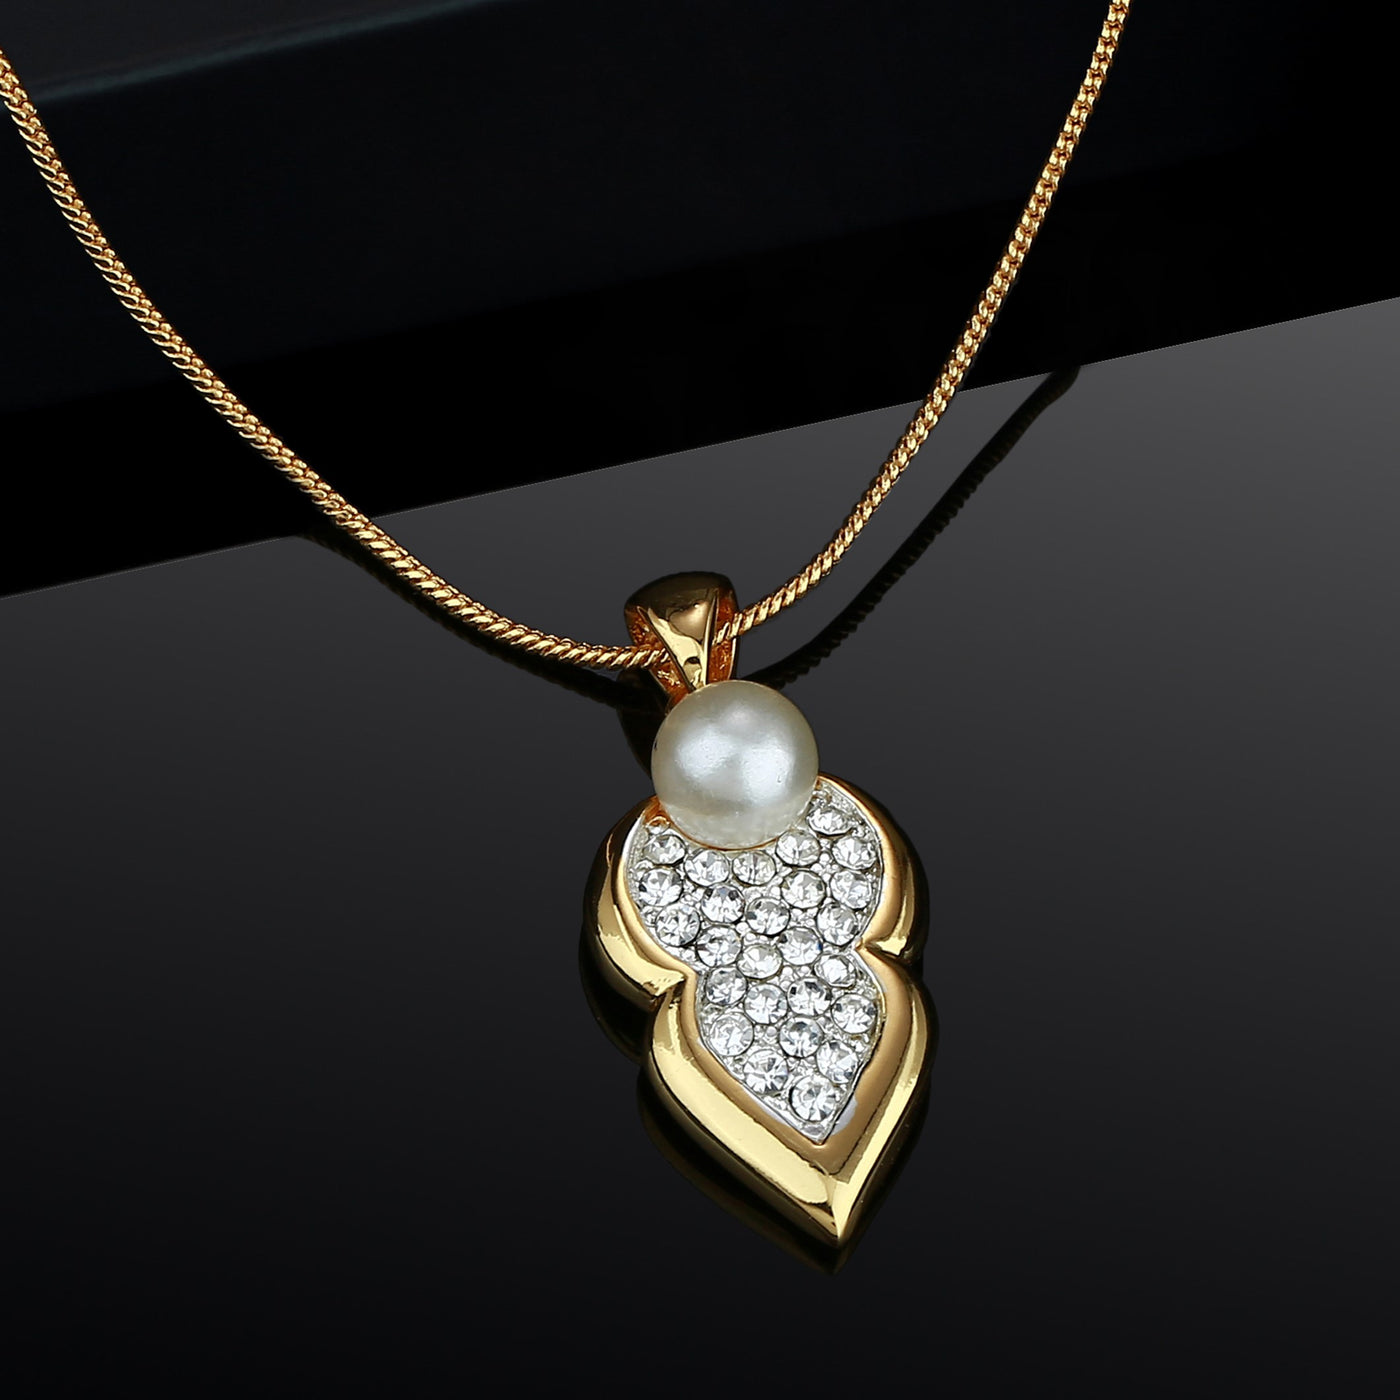 Estele - Gold Plated Leafy Shaped Pendant with Austrian Crystals & Pearl for Women / Girls